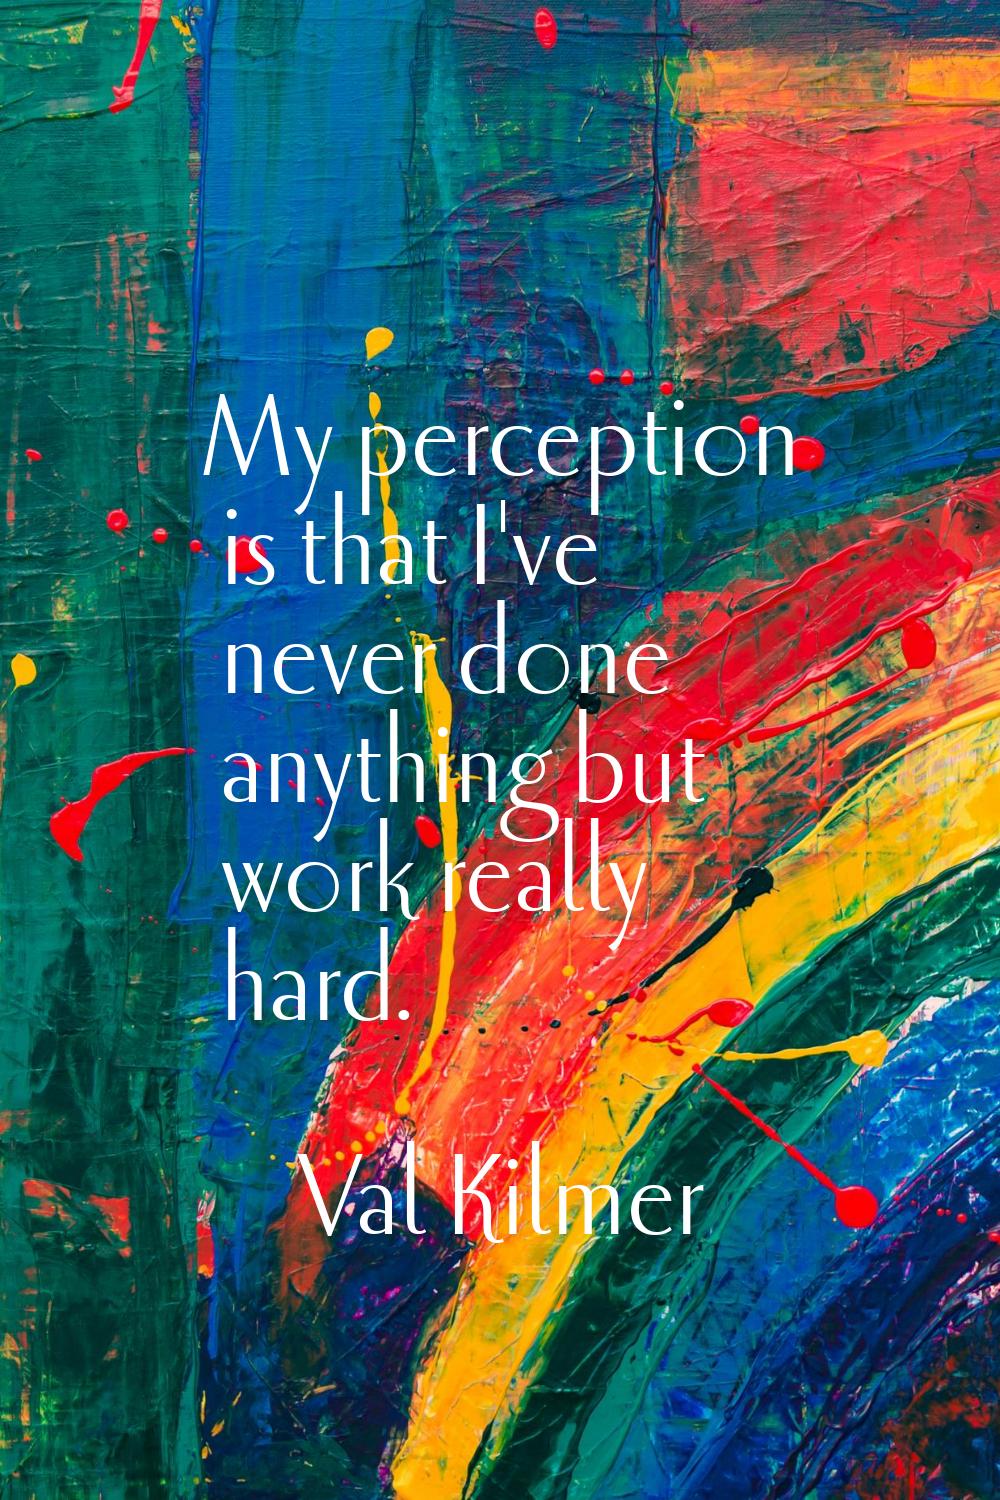 My perception is that I've never done anything but work really hard.